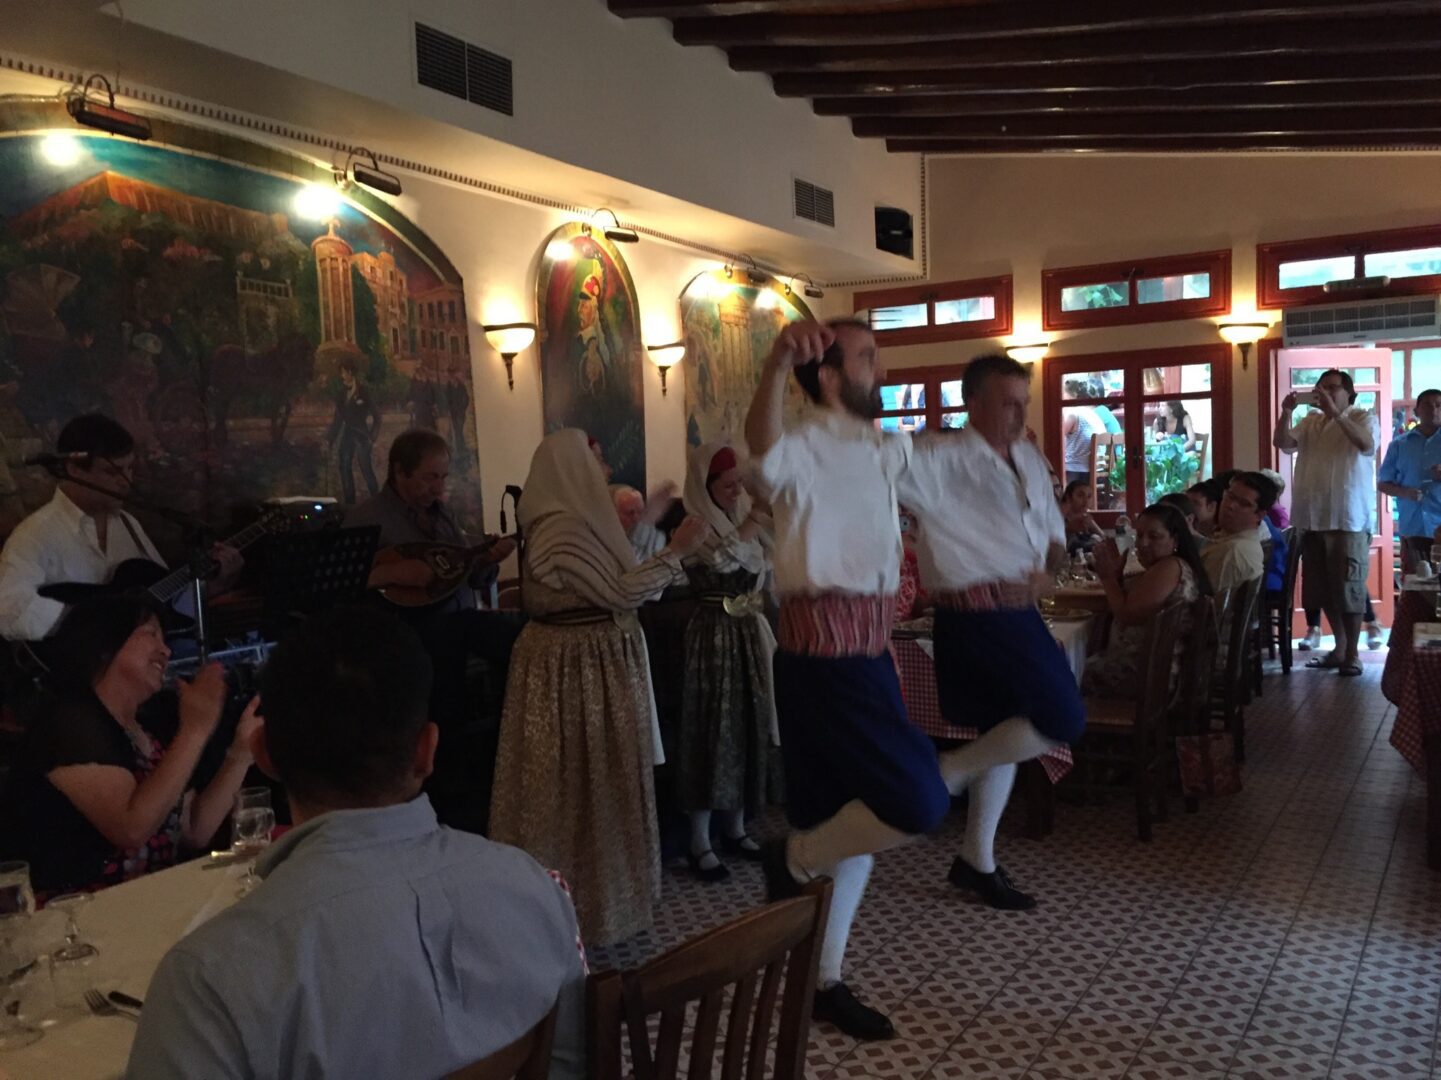 A group of people dancing in a restaurant.